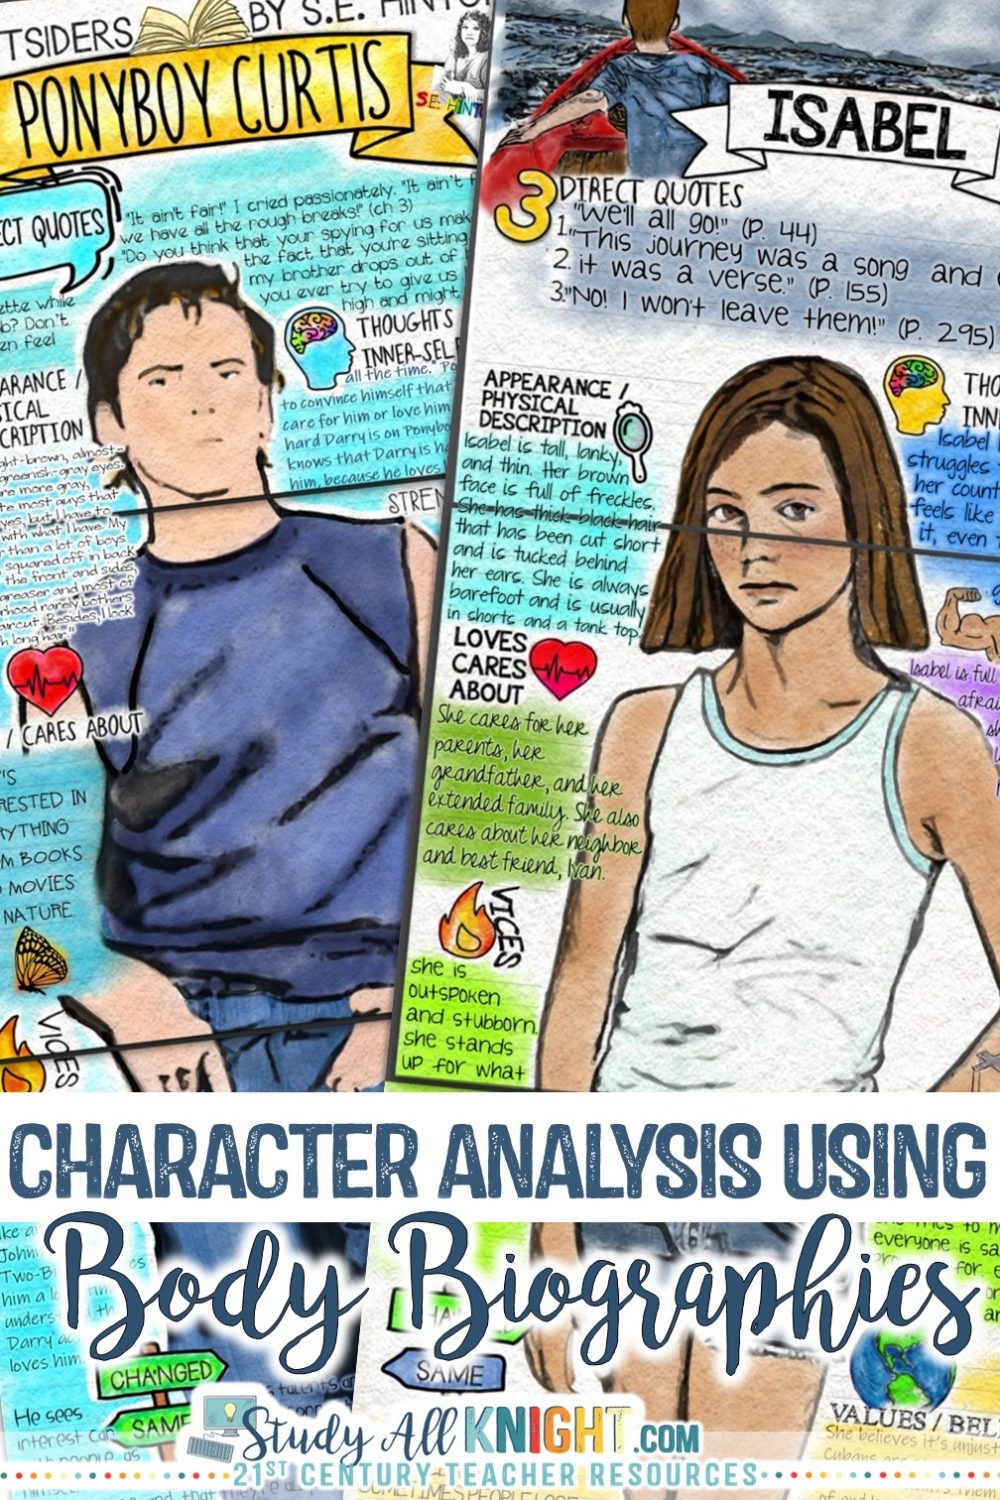 How to Teach Character Analysis Using Body Biographies. Have you been searching for a really fun, student-centered, interactive way to eliminate their boredom? Here is a wonderful student-collaboration activity that will get your students involved and excited for a character analysis for any novel, biography study, mythology, current events, or for creative writing and character development. For grades 4, 5, 6, 7, 8, 9, 10, 11, 12. Middle School ELA | High School English #middleschoolteachers #highschoolenglish